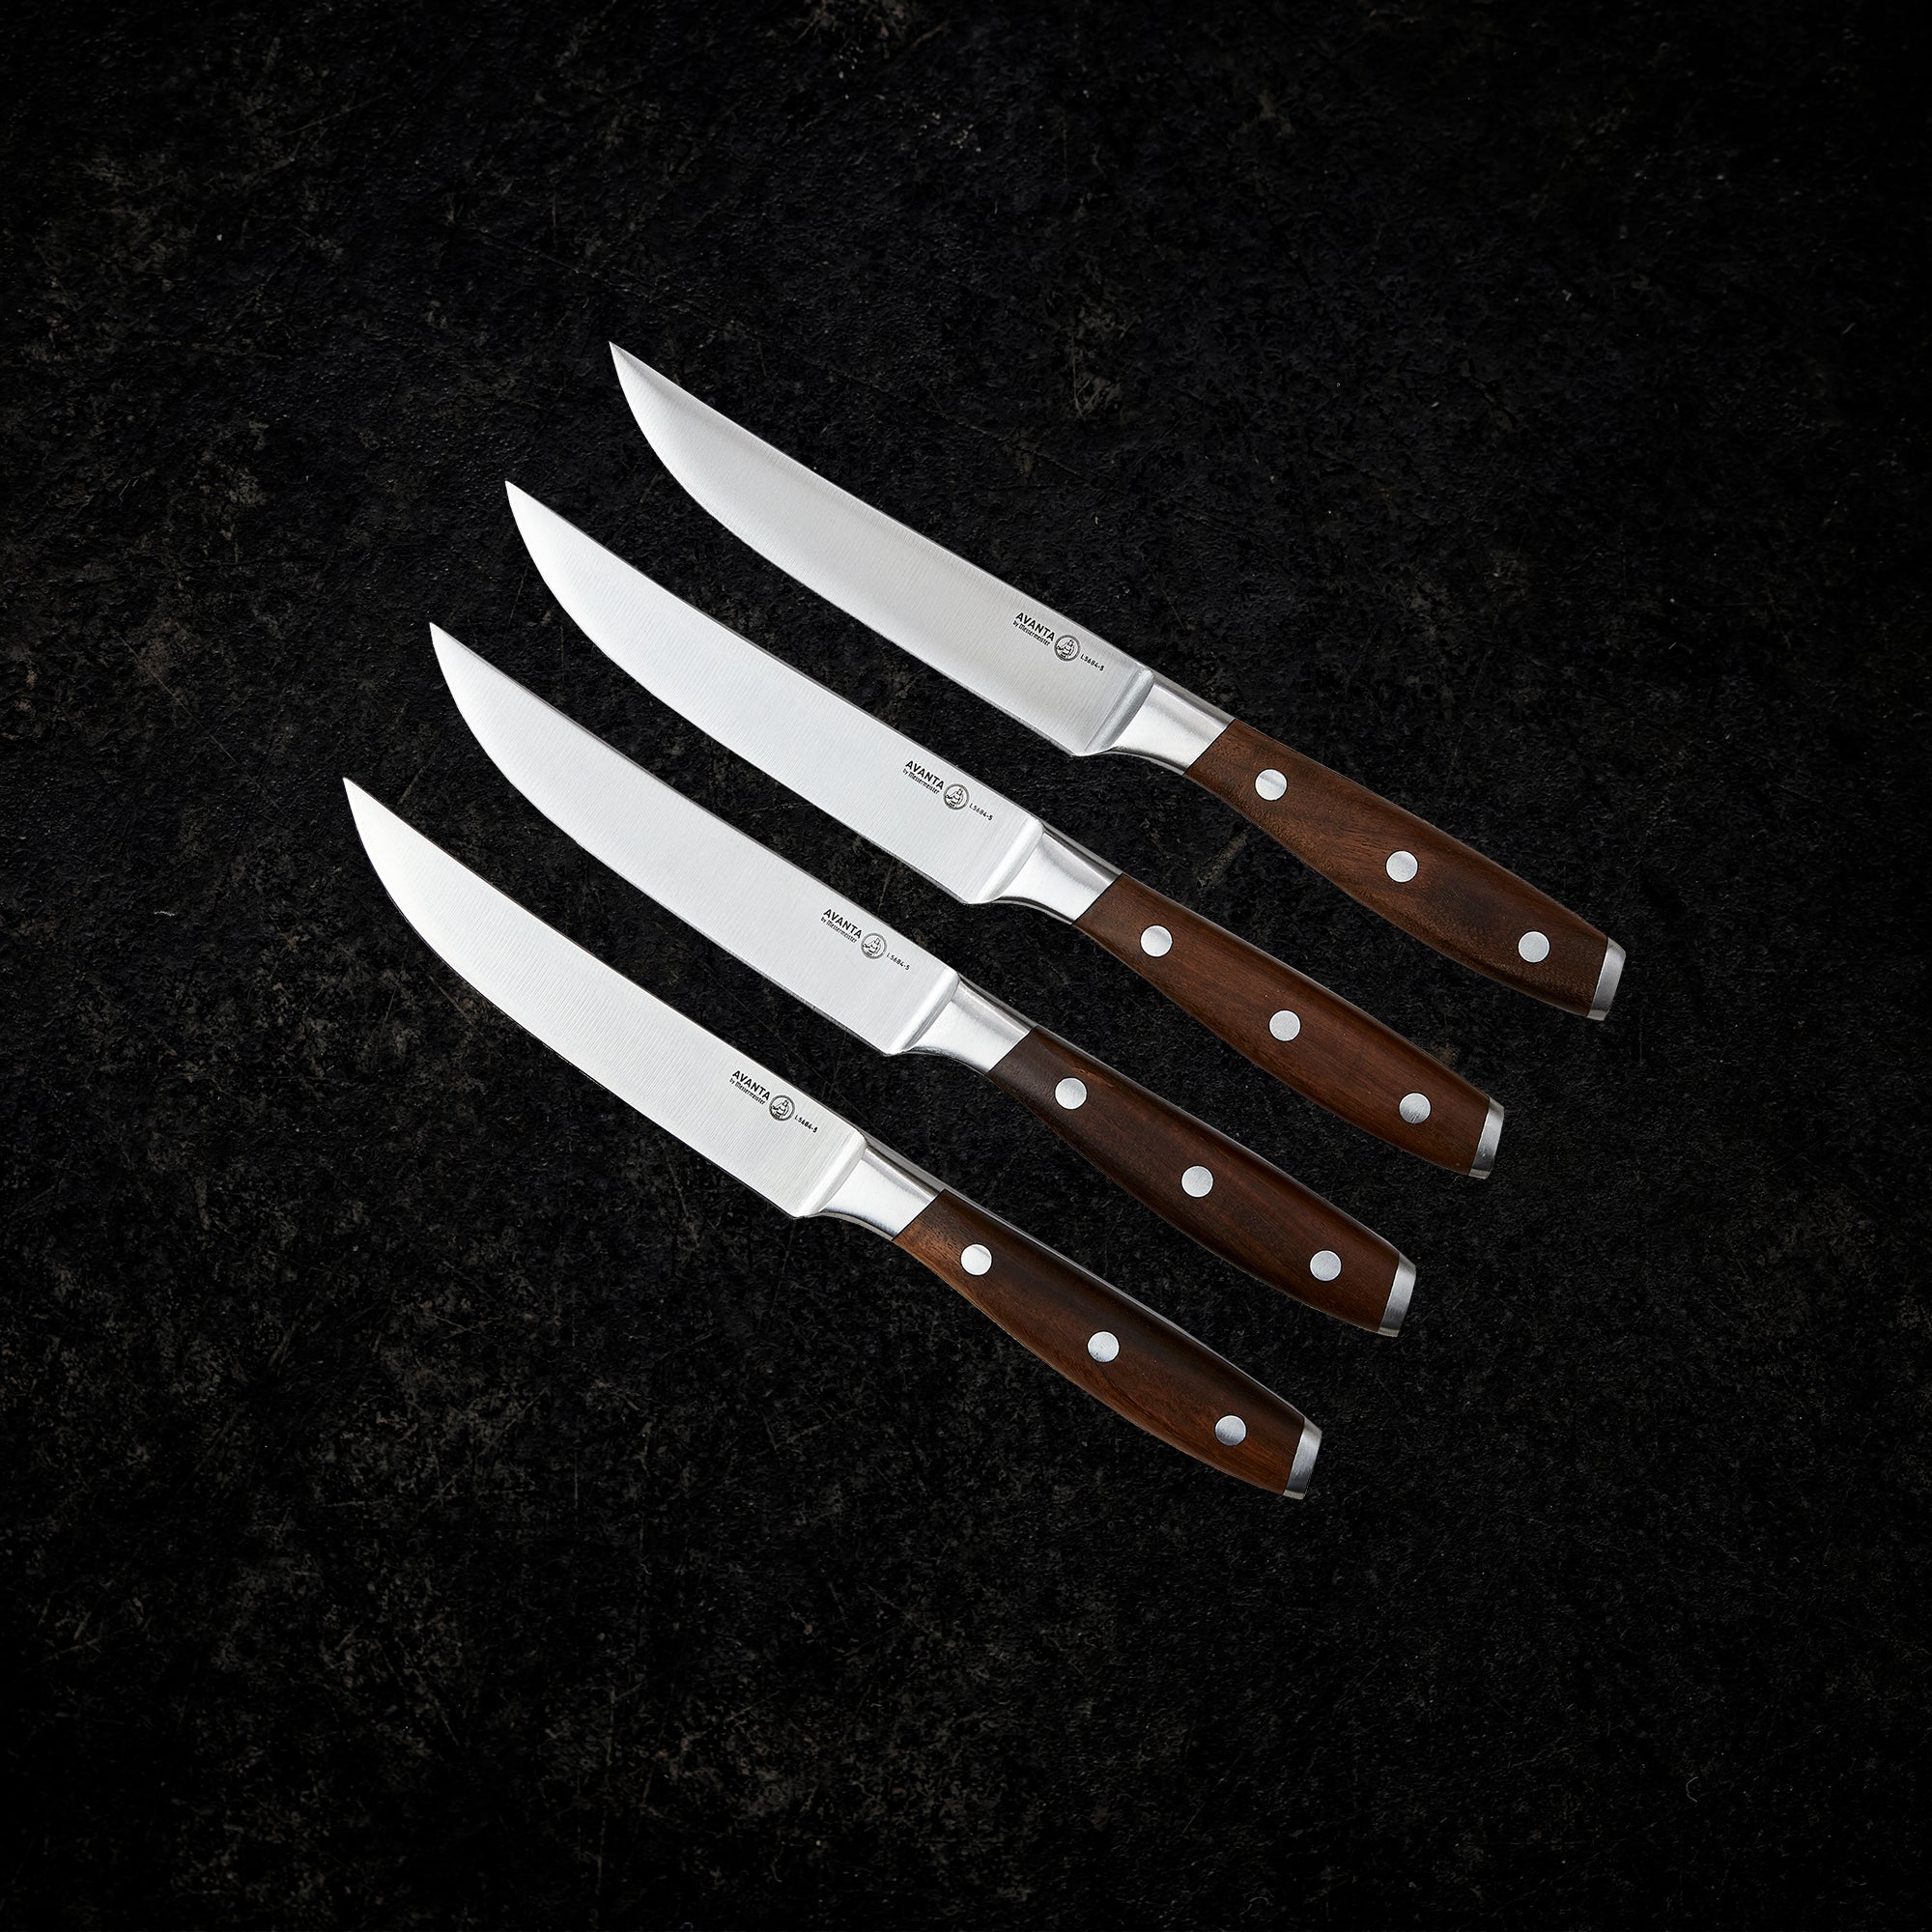 Steakhouse Steak Knife Set (4-piece with Maple Box)